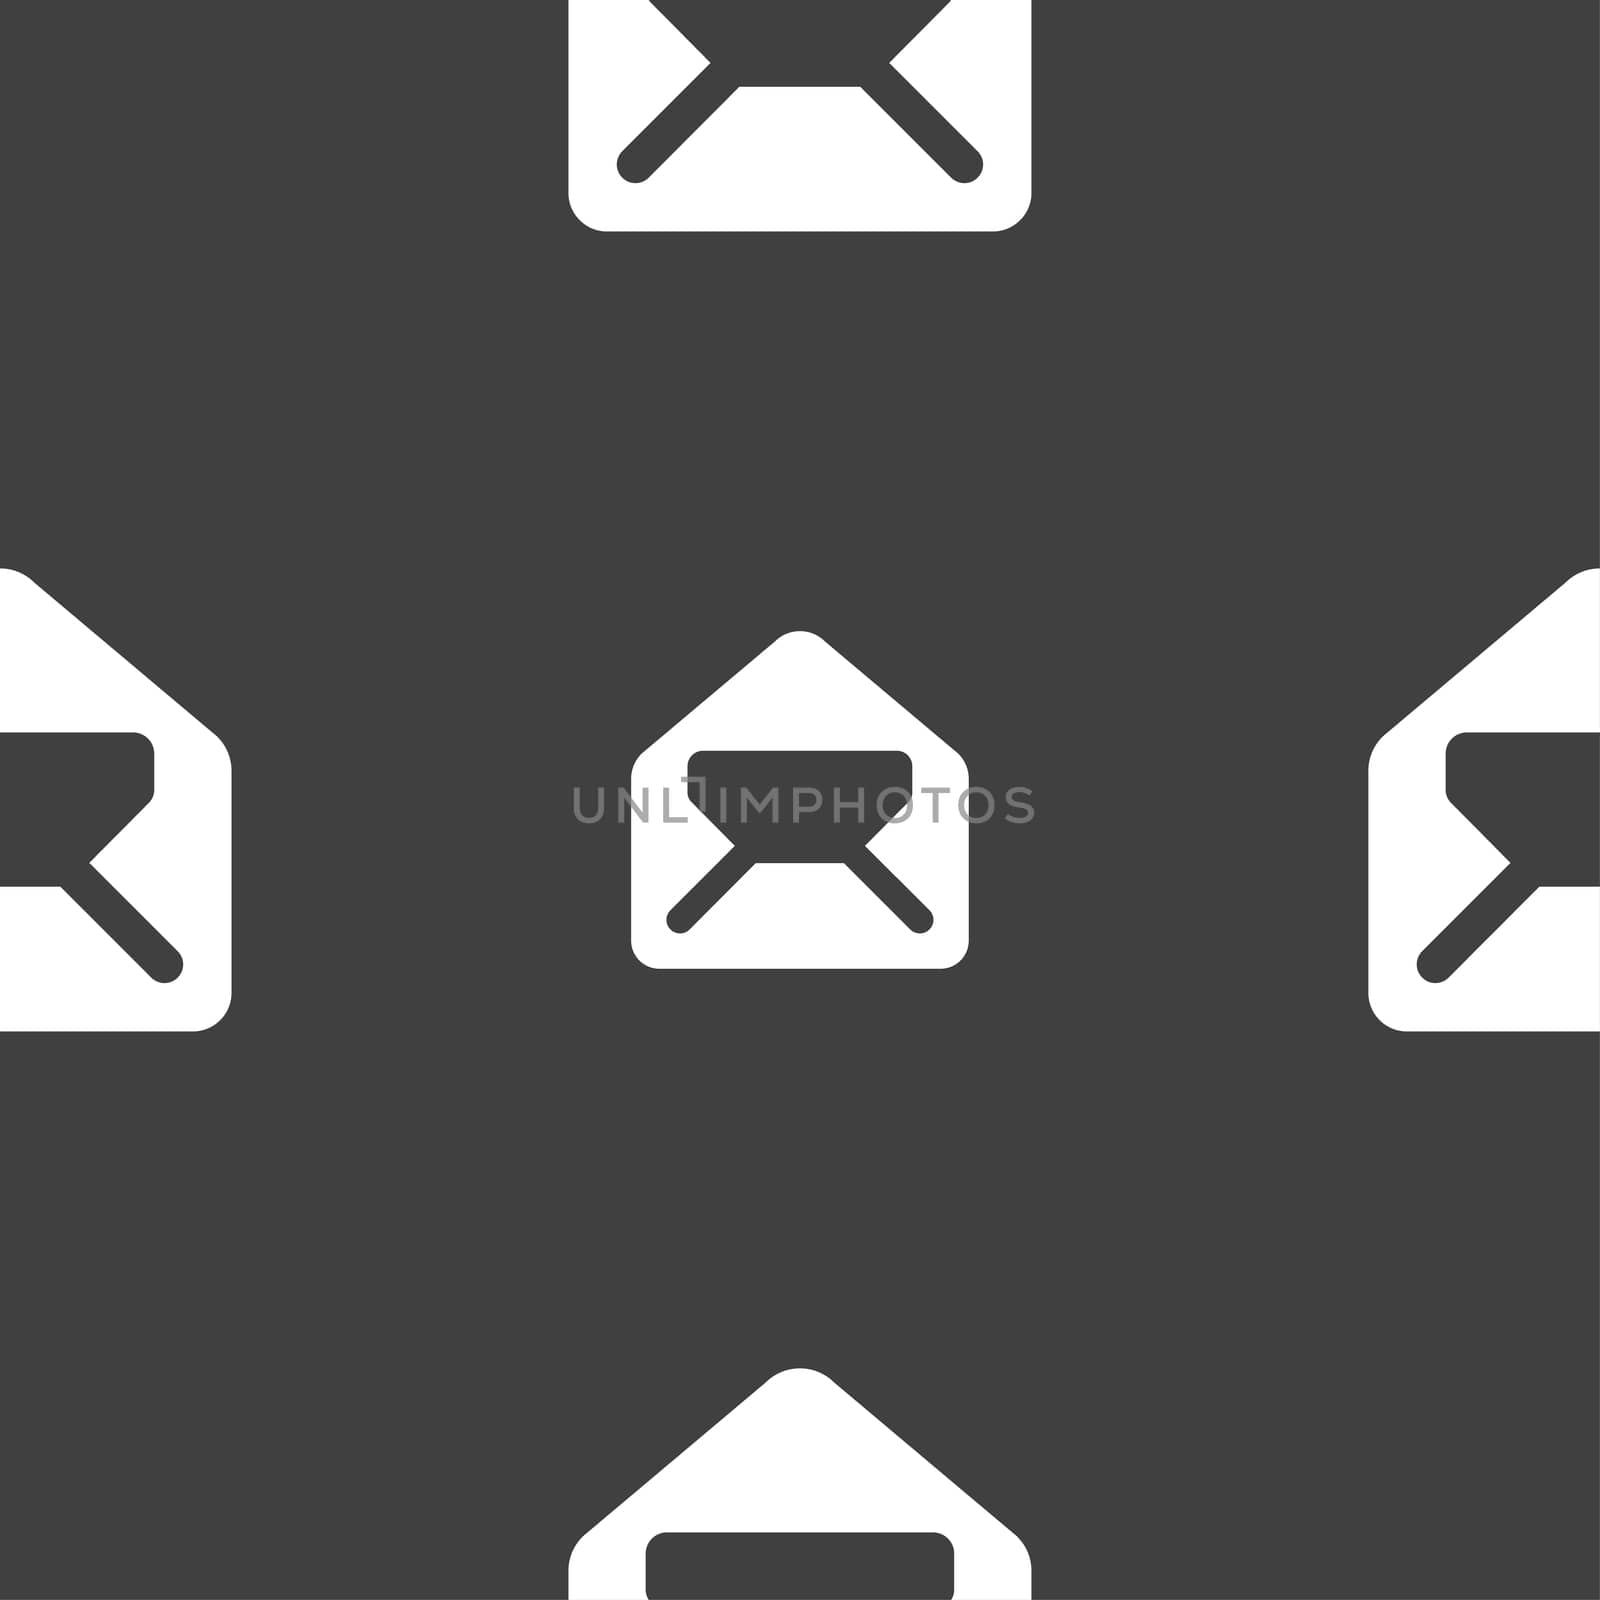 Mail, envelope, letter icon sign. Seamless pattern on a gray background. illustration